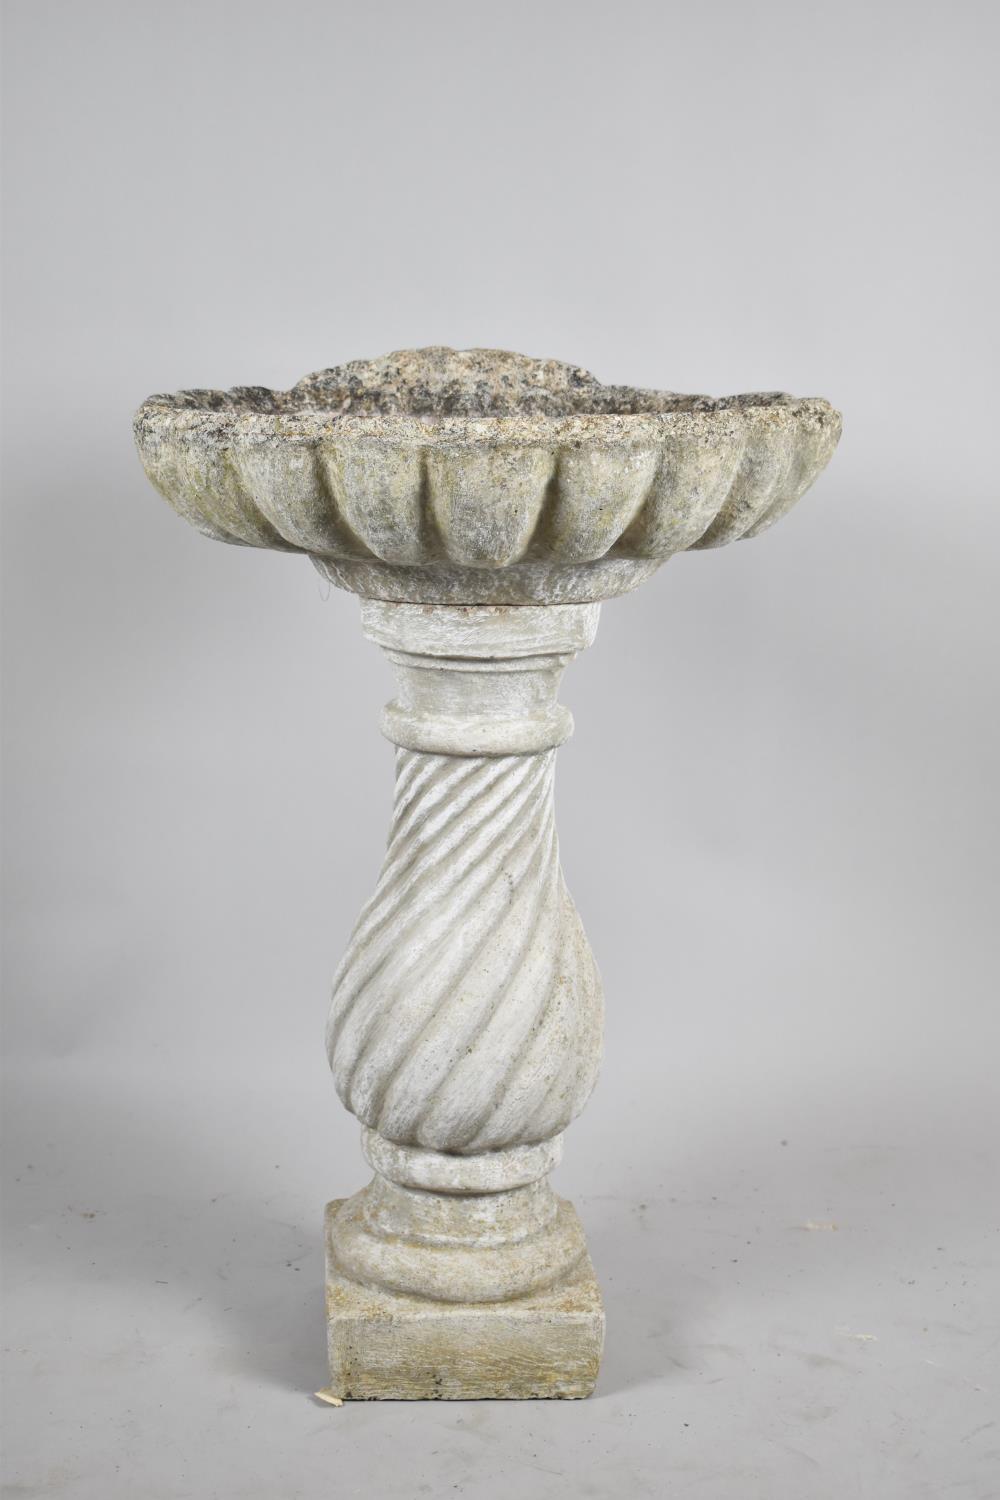 A Reconstituted Stone Bird Bath of Shell Form on Baluster Vase Support, 78cm high - Image 2 of 2